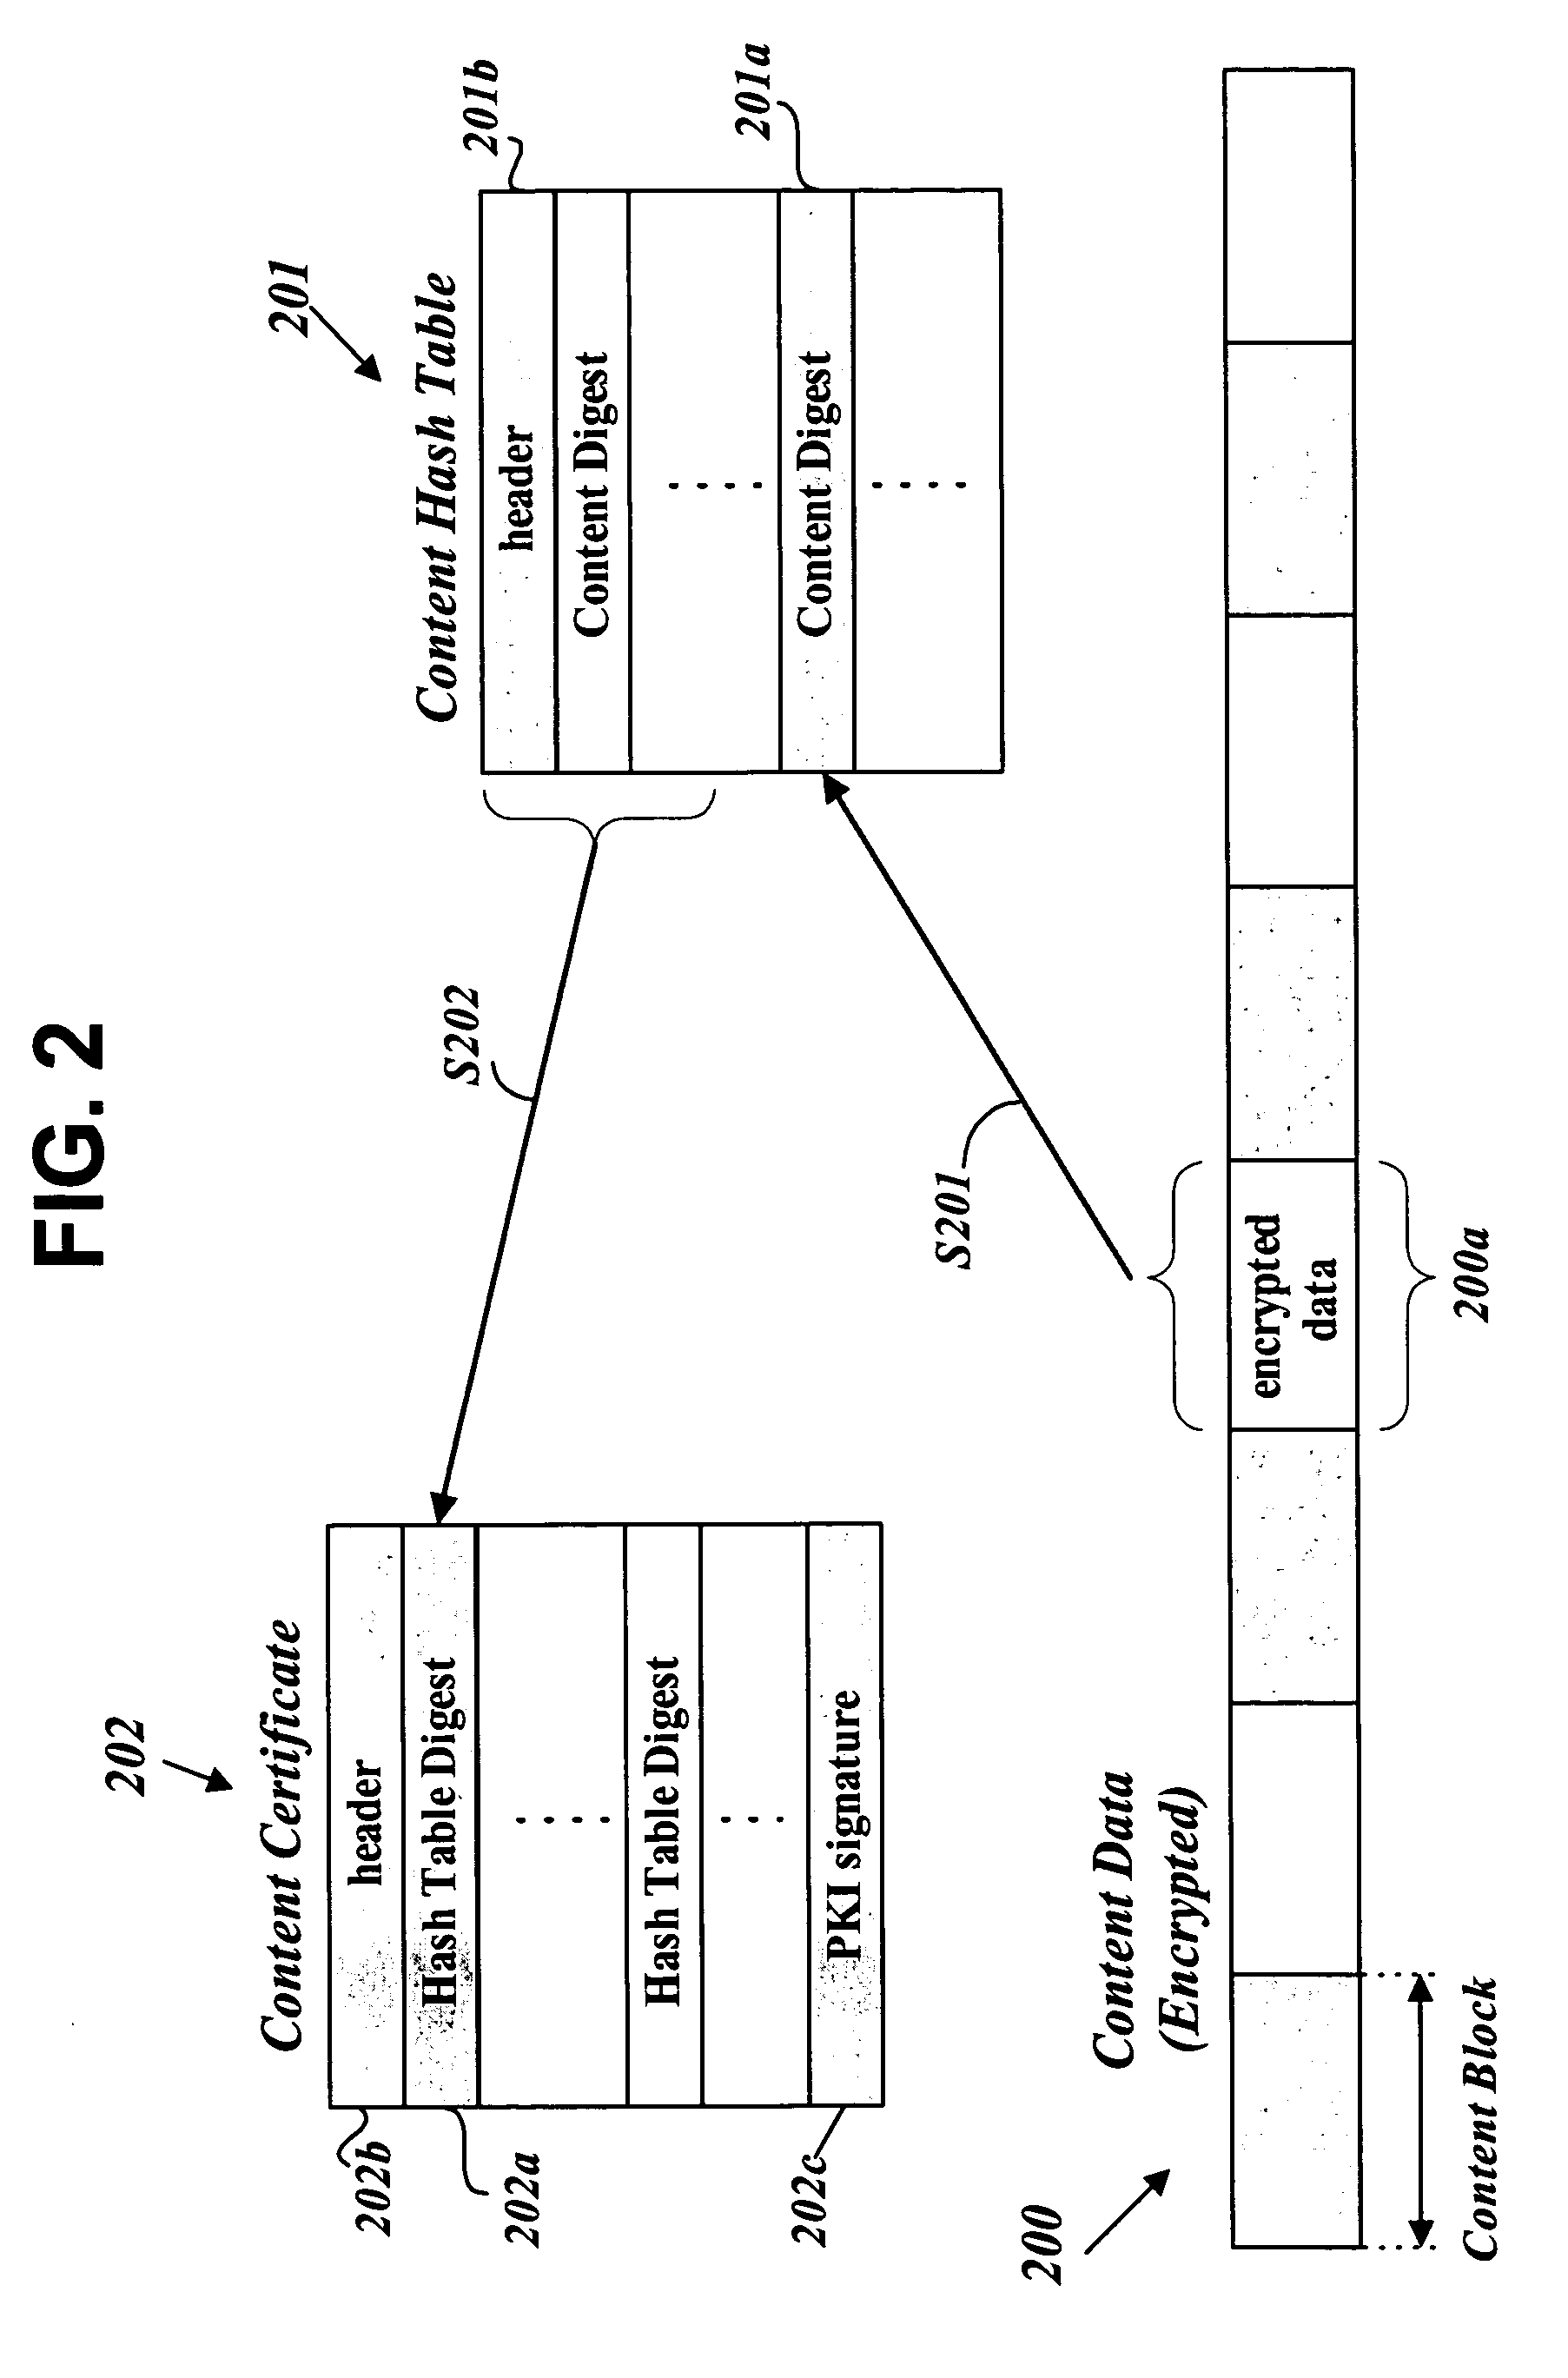 Method for securing content on a recording medium and a recording medium storing content secured by the method